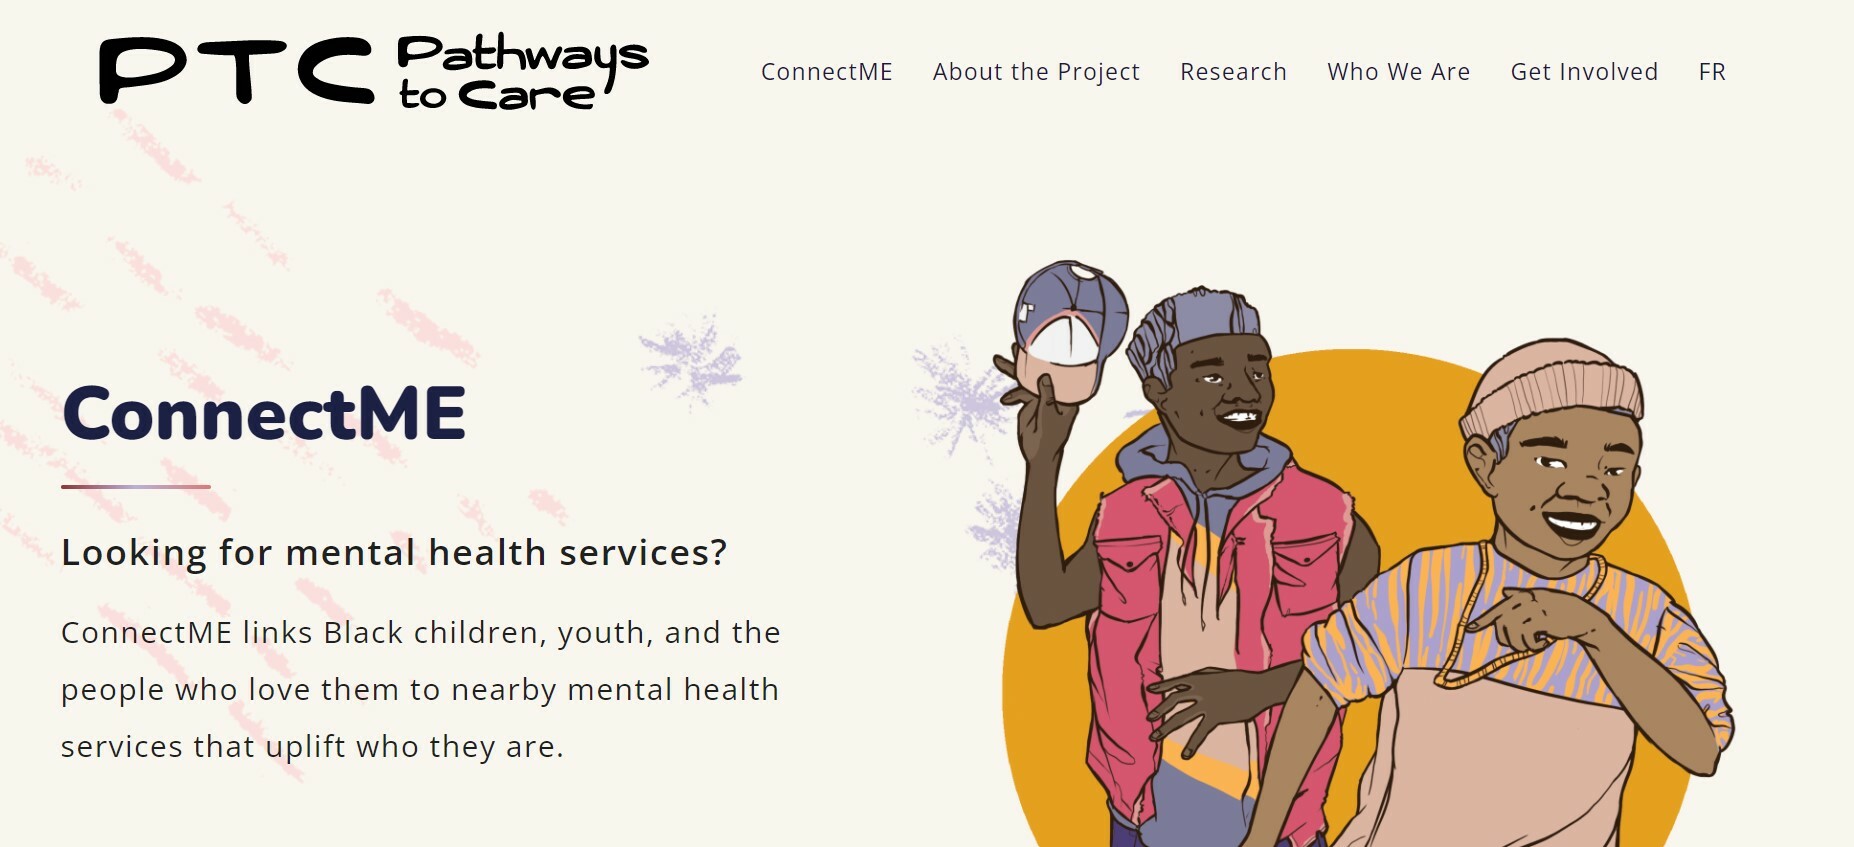 The Pathways to Care ConnectMe website